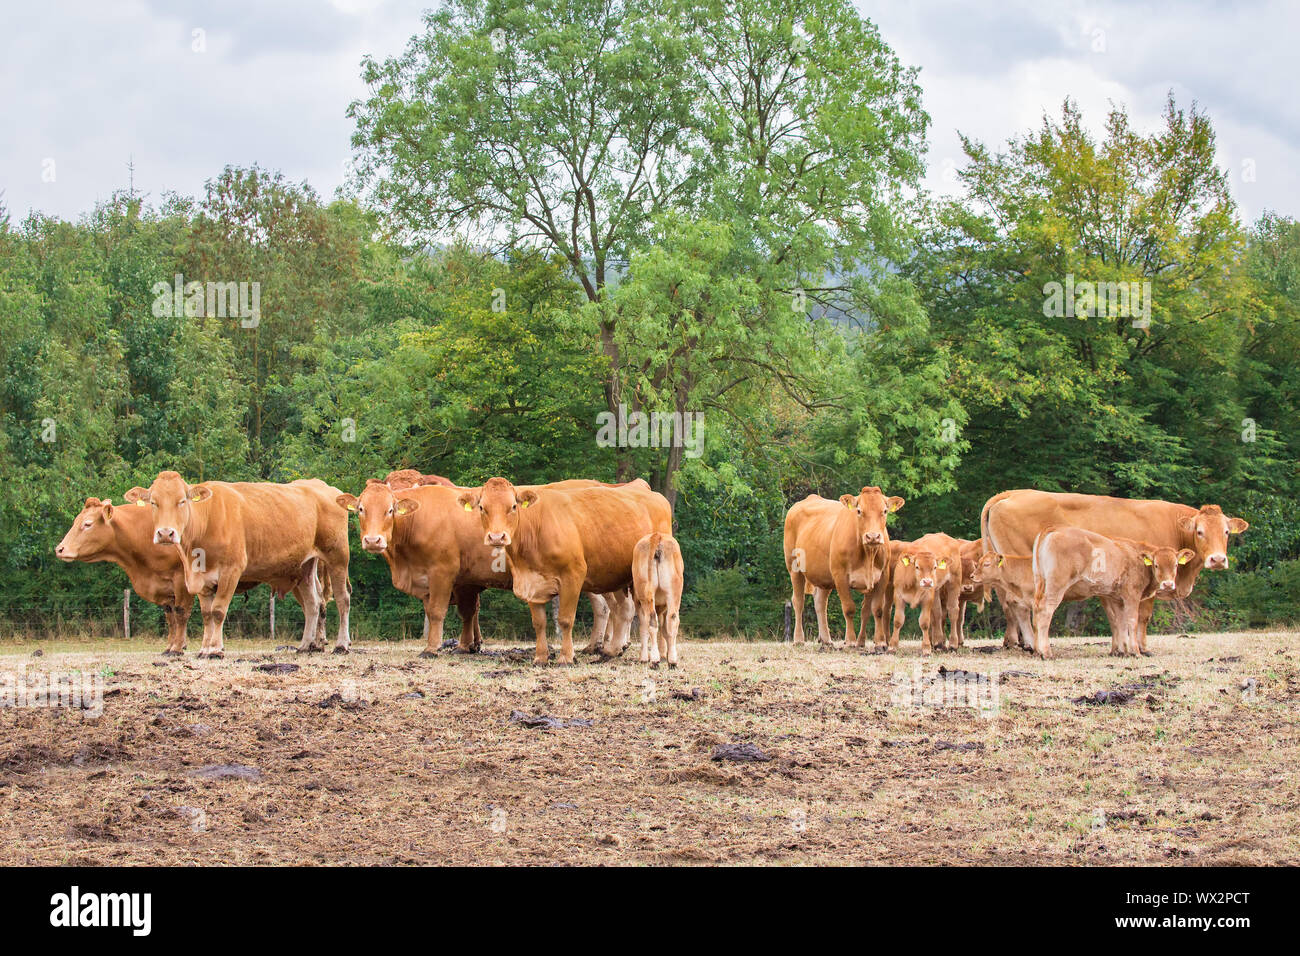 Herd of brown cows with calves in meadow Stock Photo